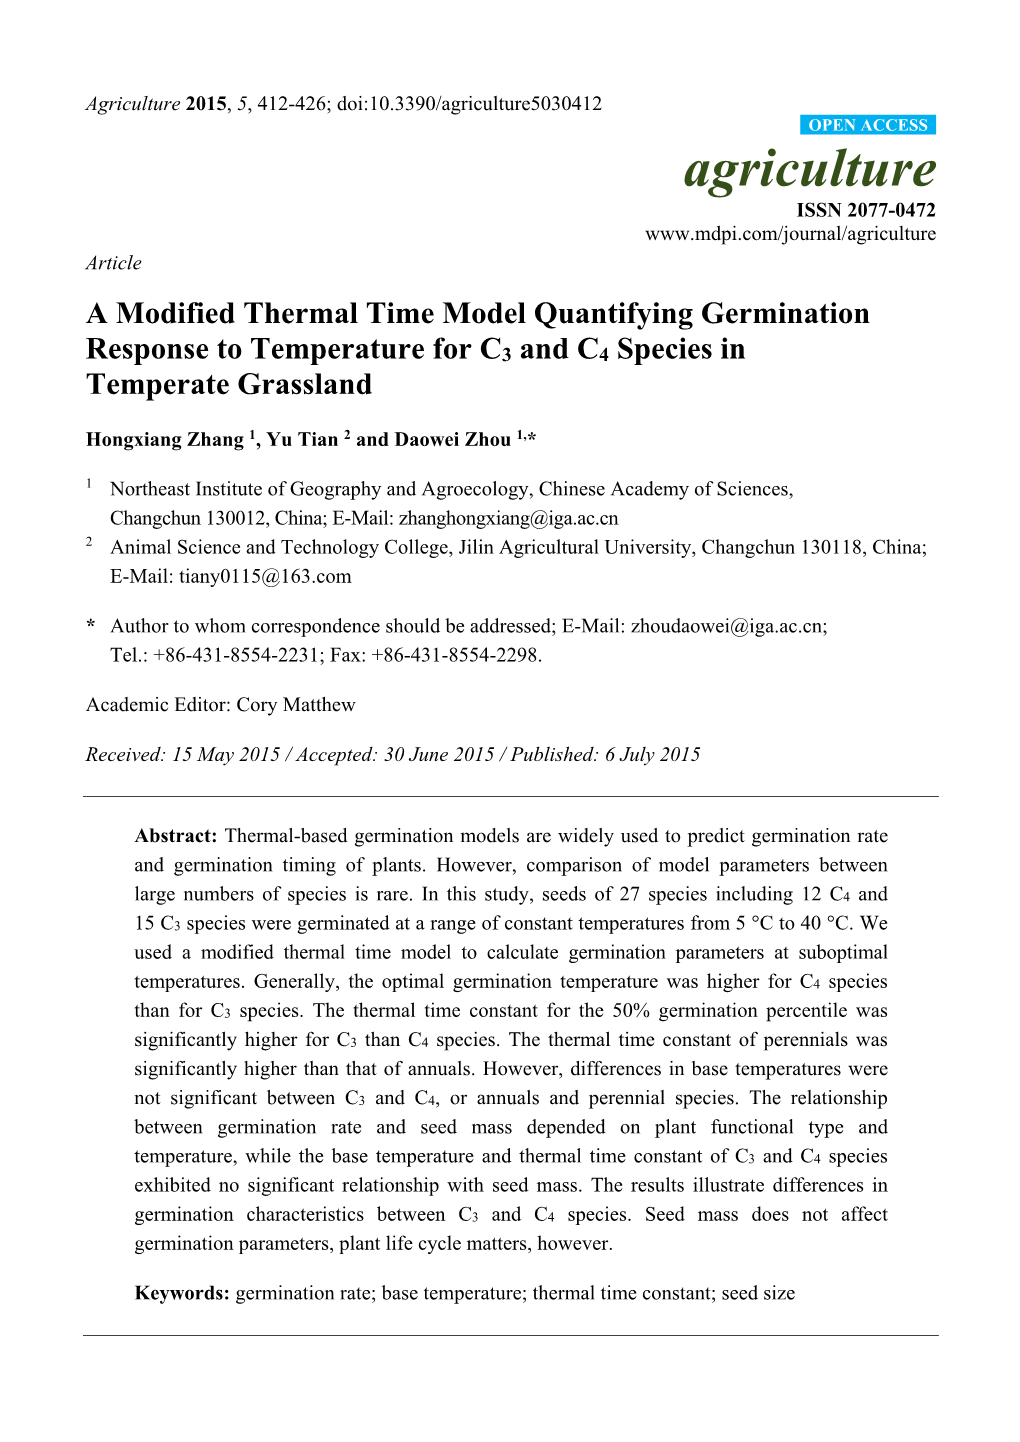 A Modified Thermal Time Model Quantifying Germination Response to Temperature for C3 and C4 Species in Temperate Grassland